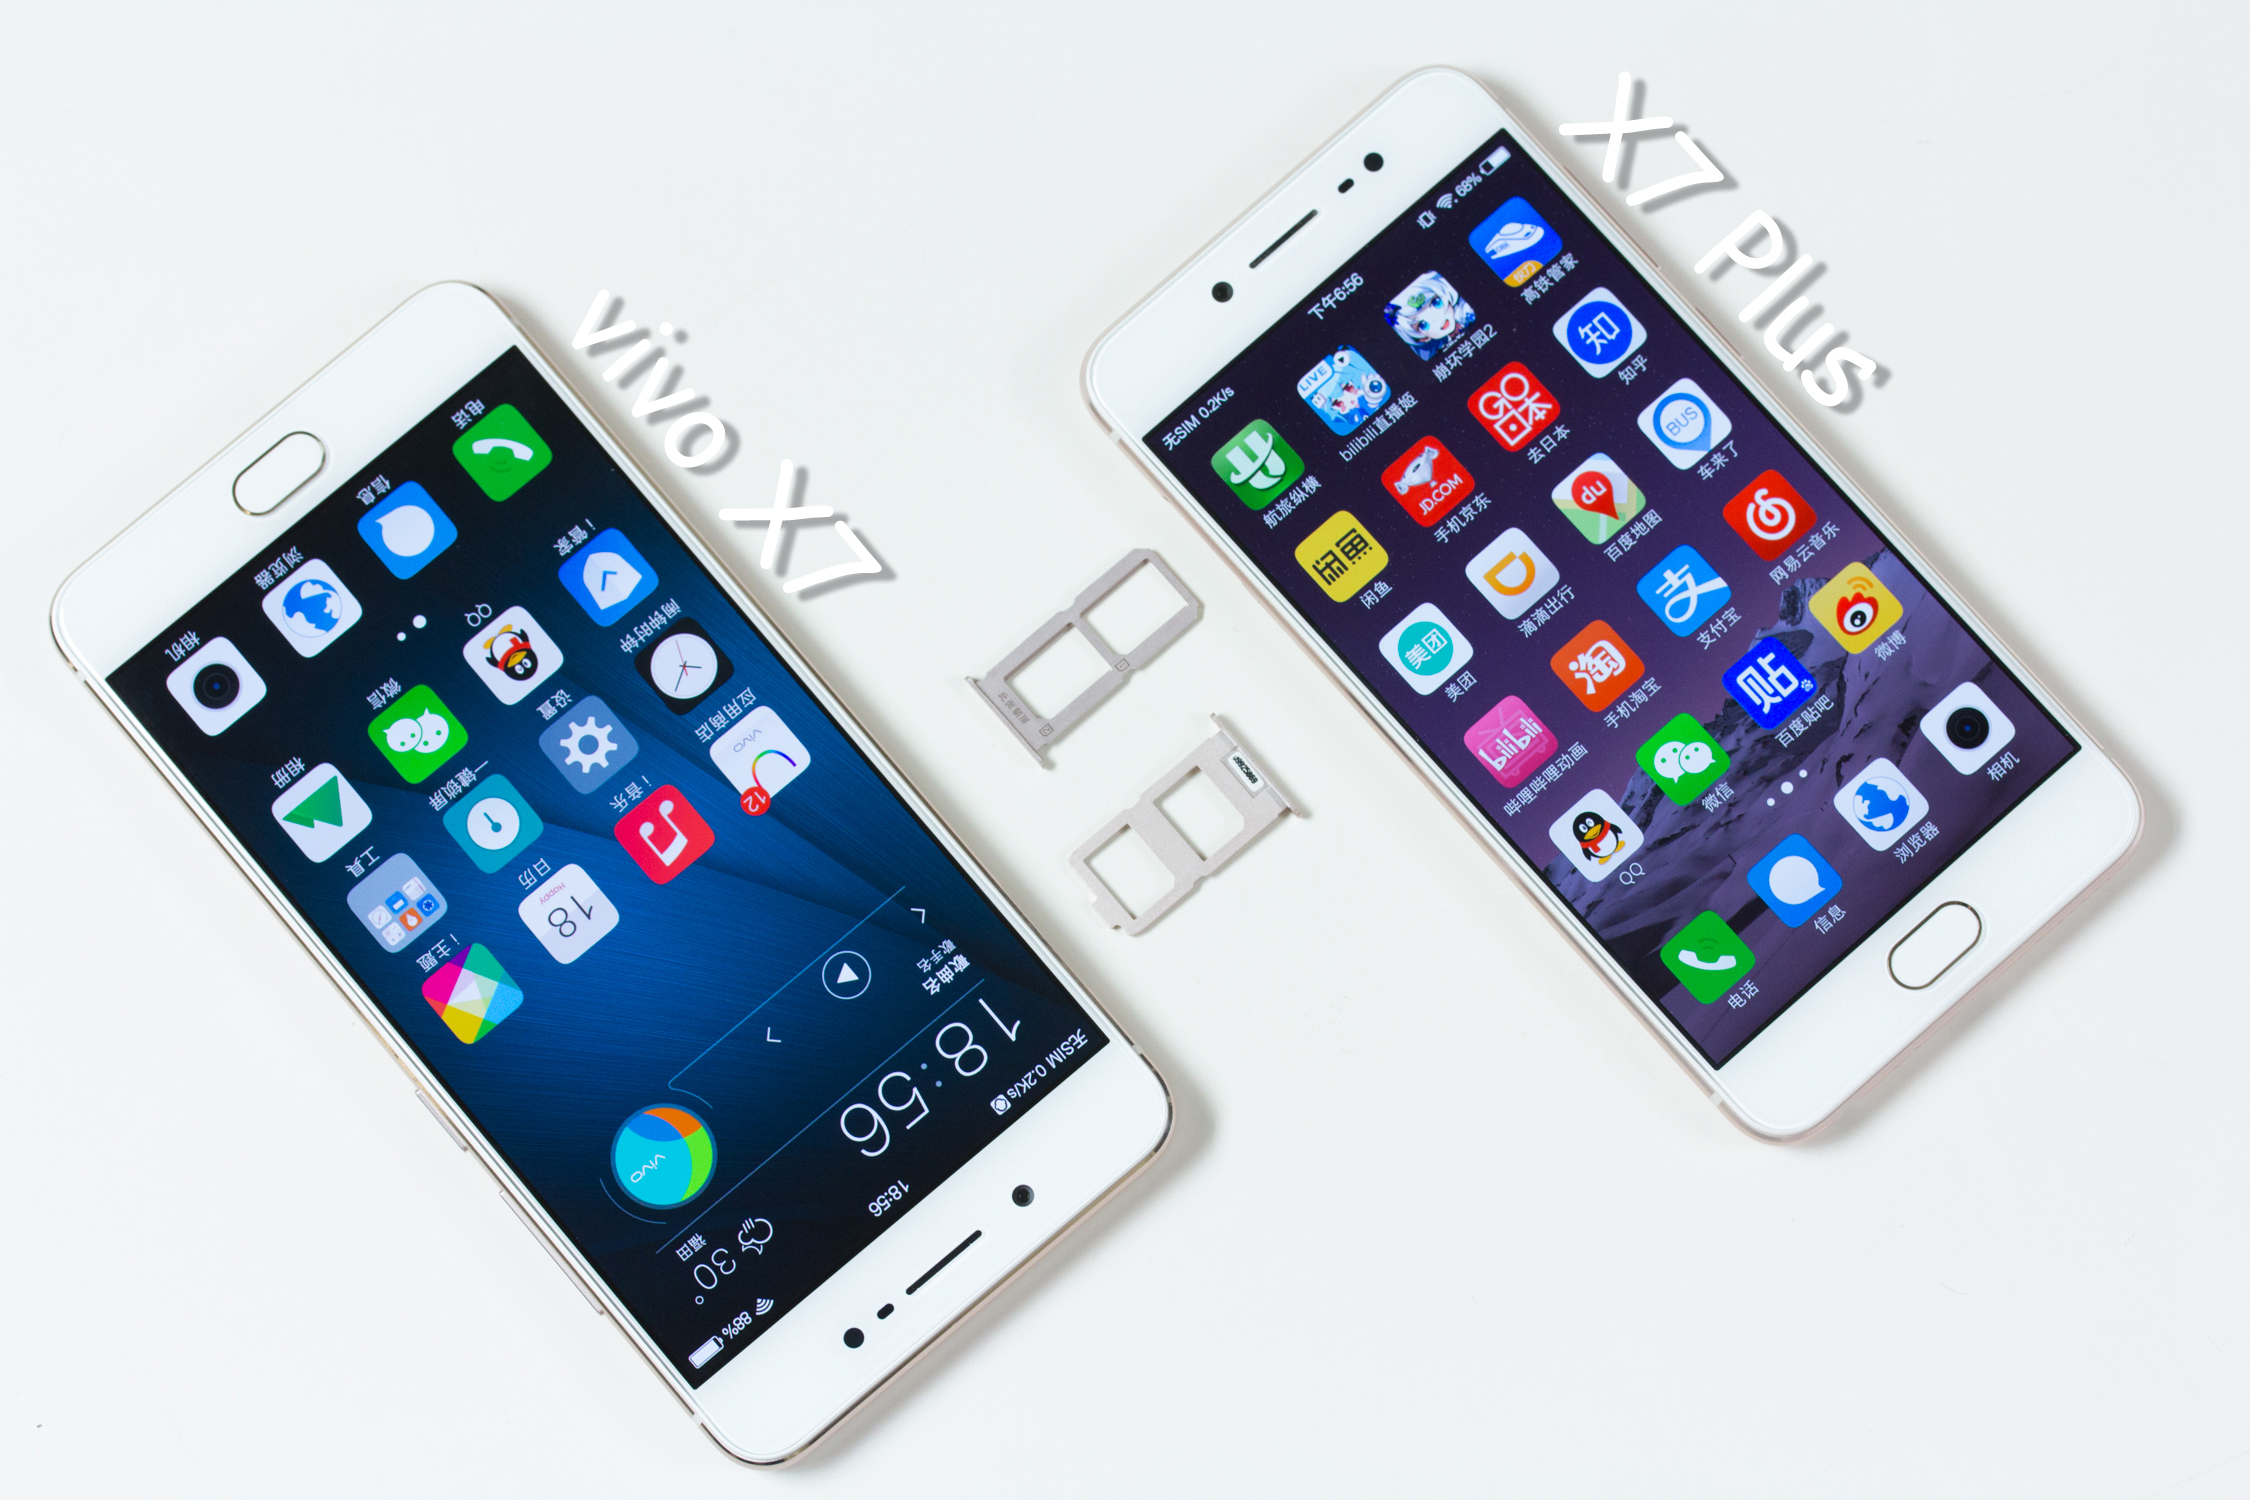 Buy BBK VIVO X7 Cell Phone Online With Good Price